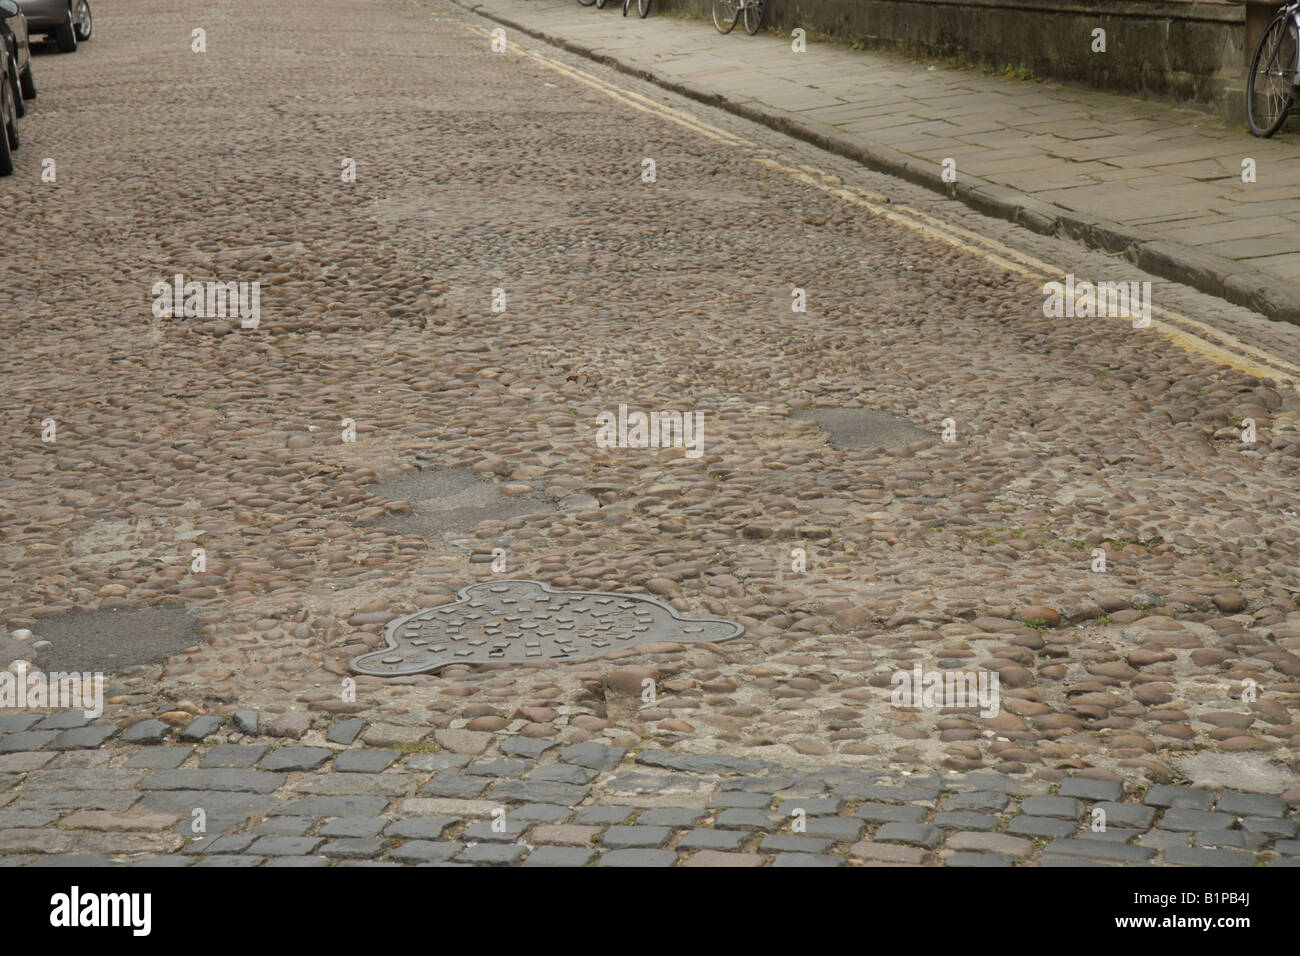 Old cobbled street with a footpath Stock Photo